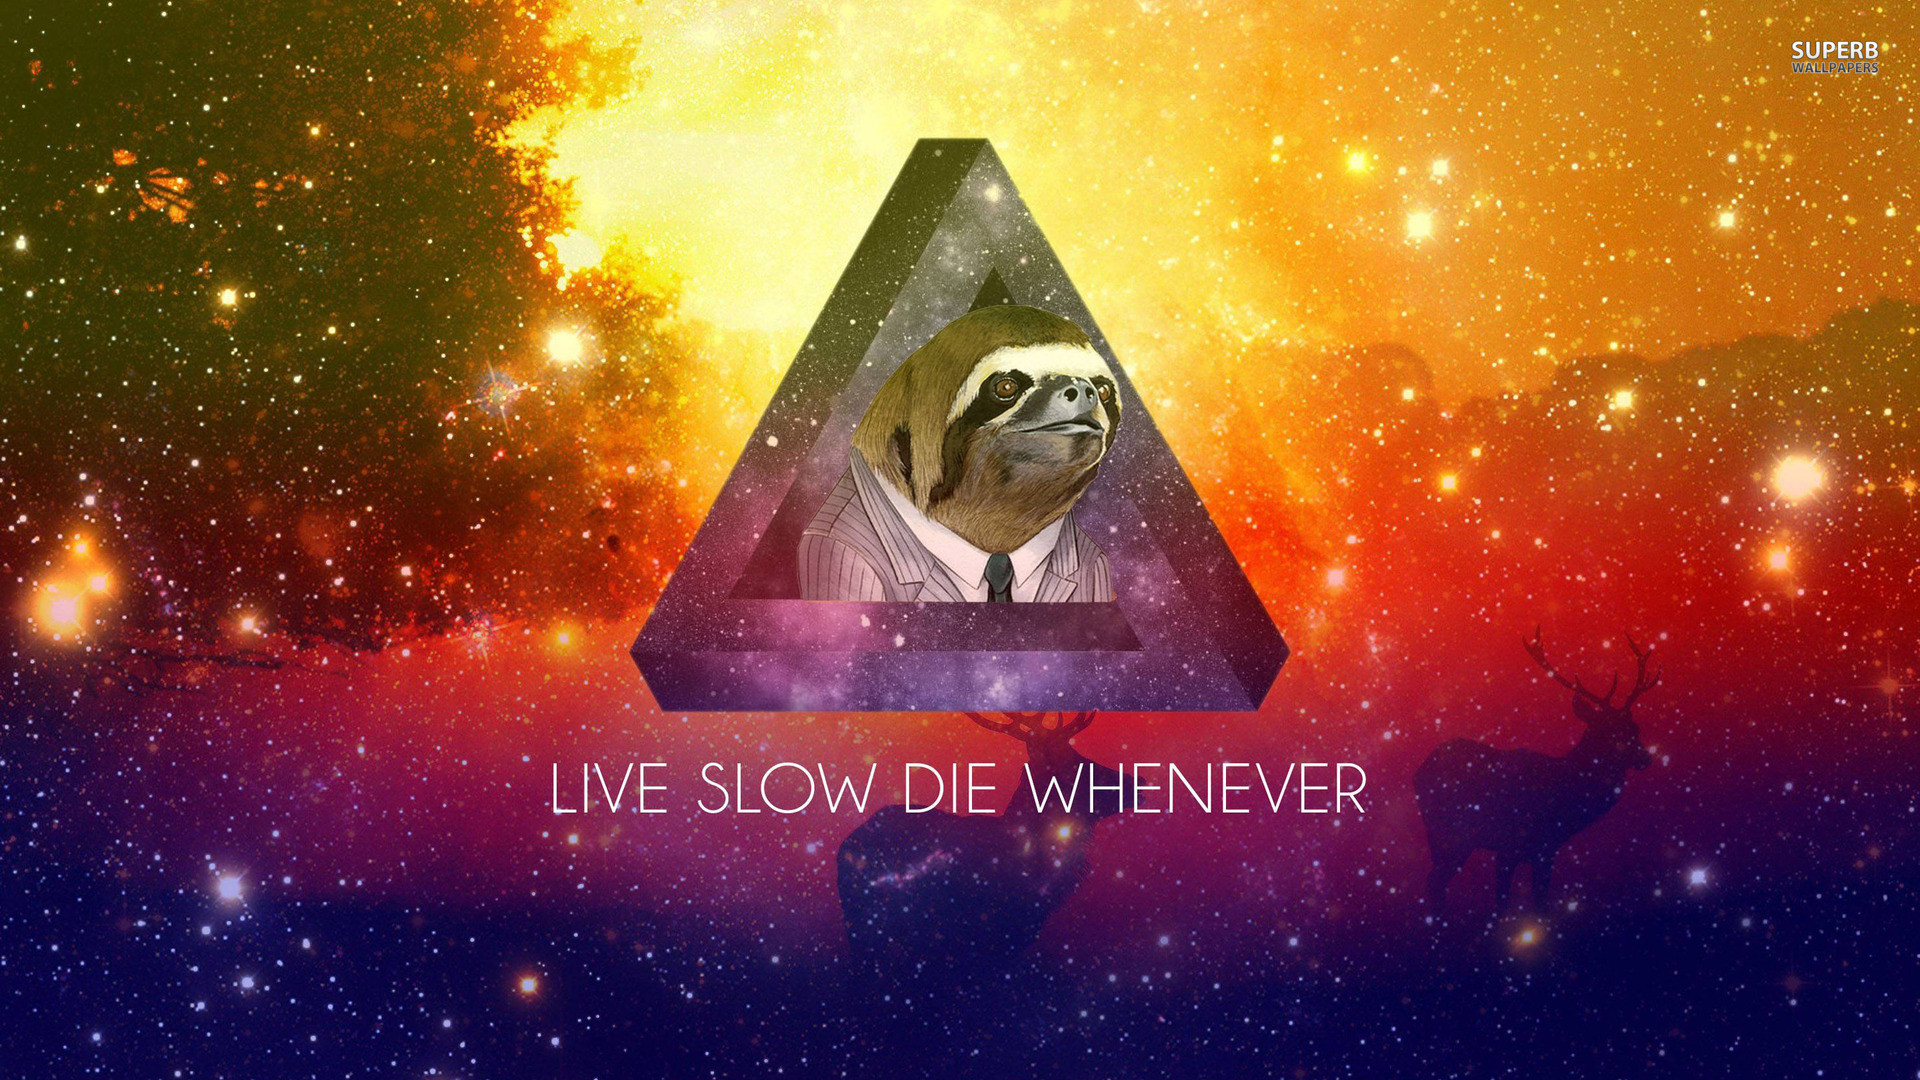 1920x1080 My laptop background I might post this everytime in the context of sloths